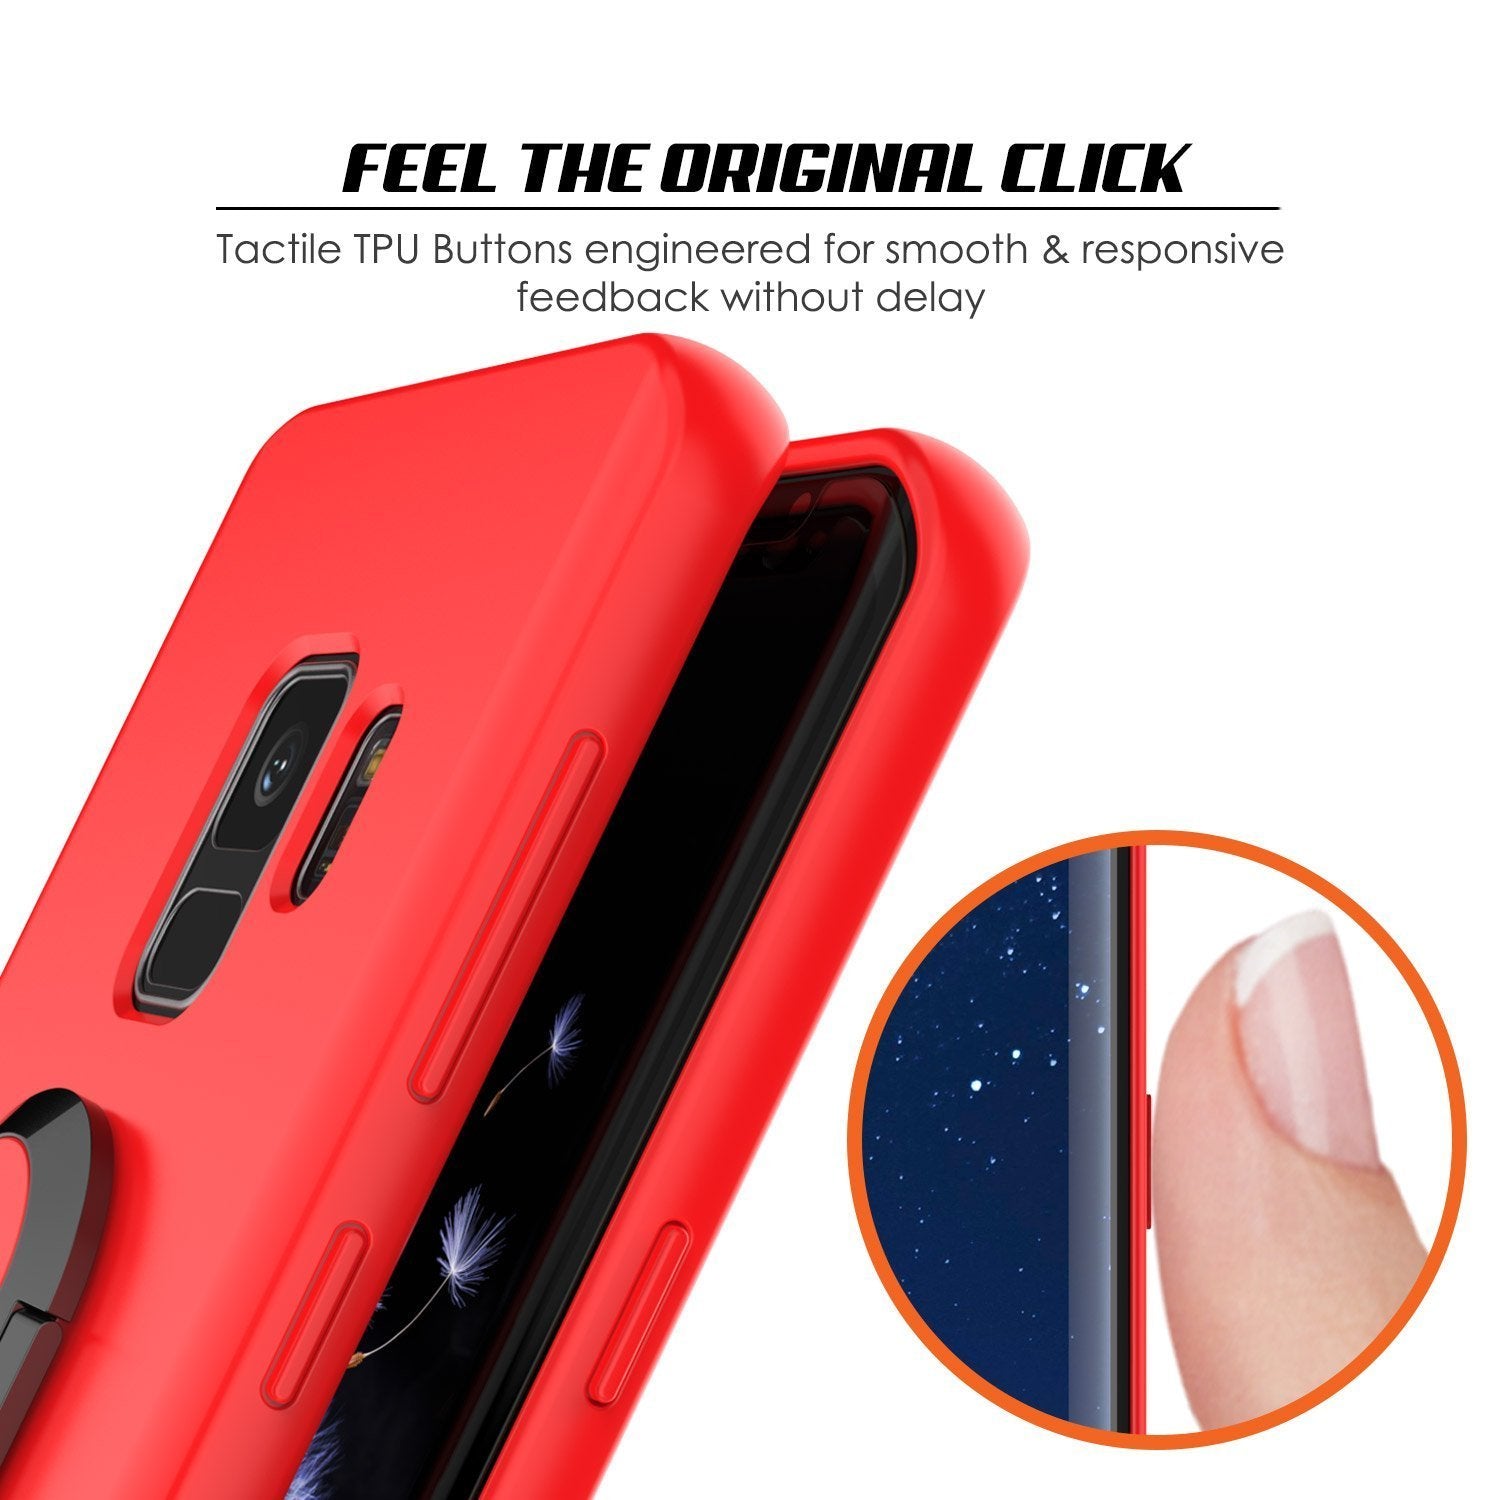 Galaxy S9 Case, Punkcase Magnetix Protective TPU Cover W/ Kickstand, Ring Grip Holder & Metal Plate for Magnetic Car Phone Mount PLUS PunkShield Screen Protector for Samsung S9 Edge [Red]